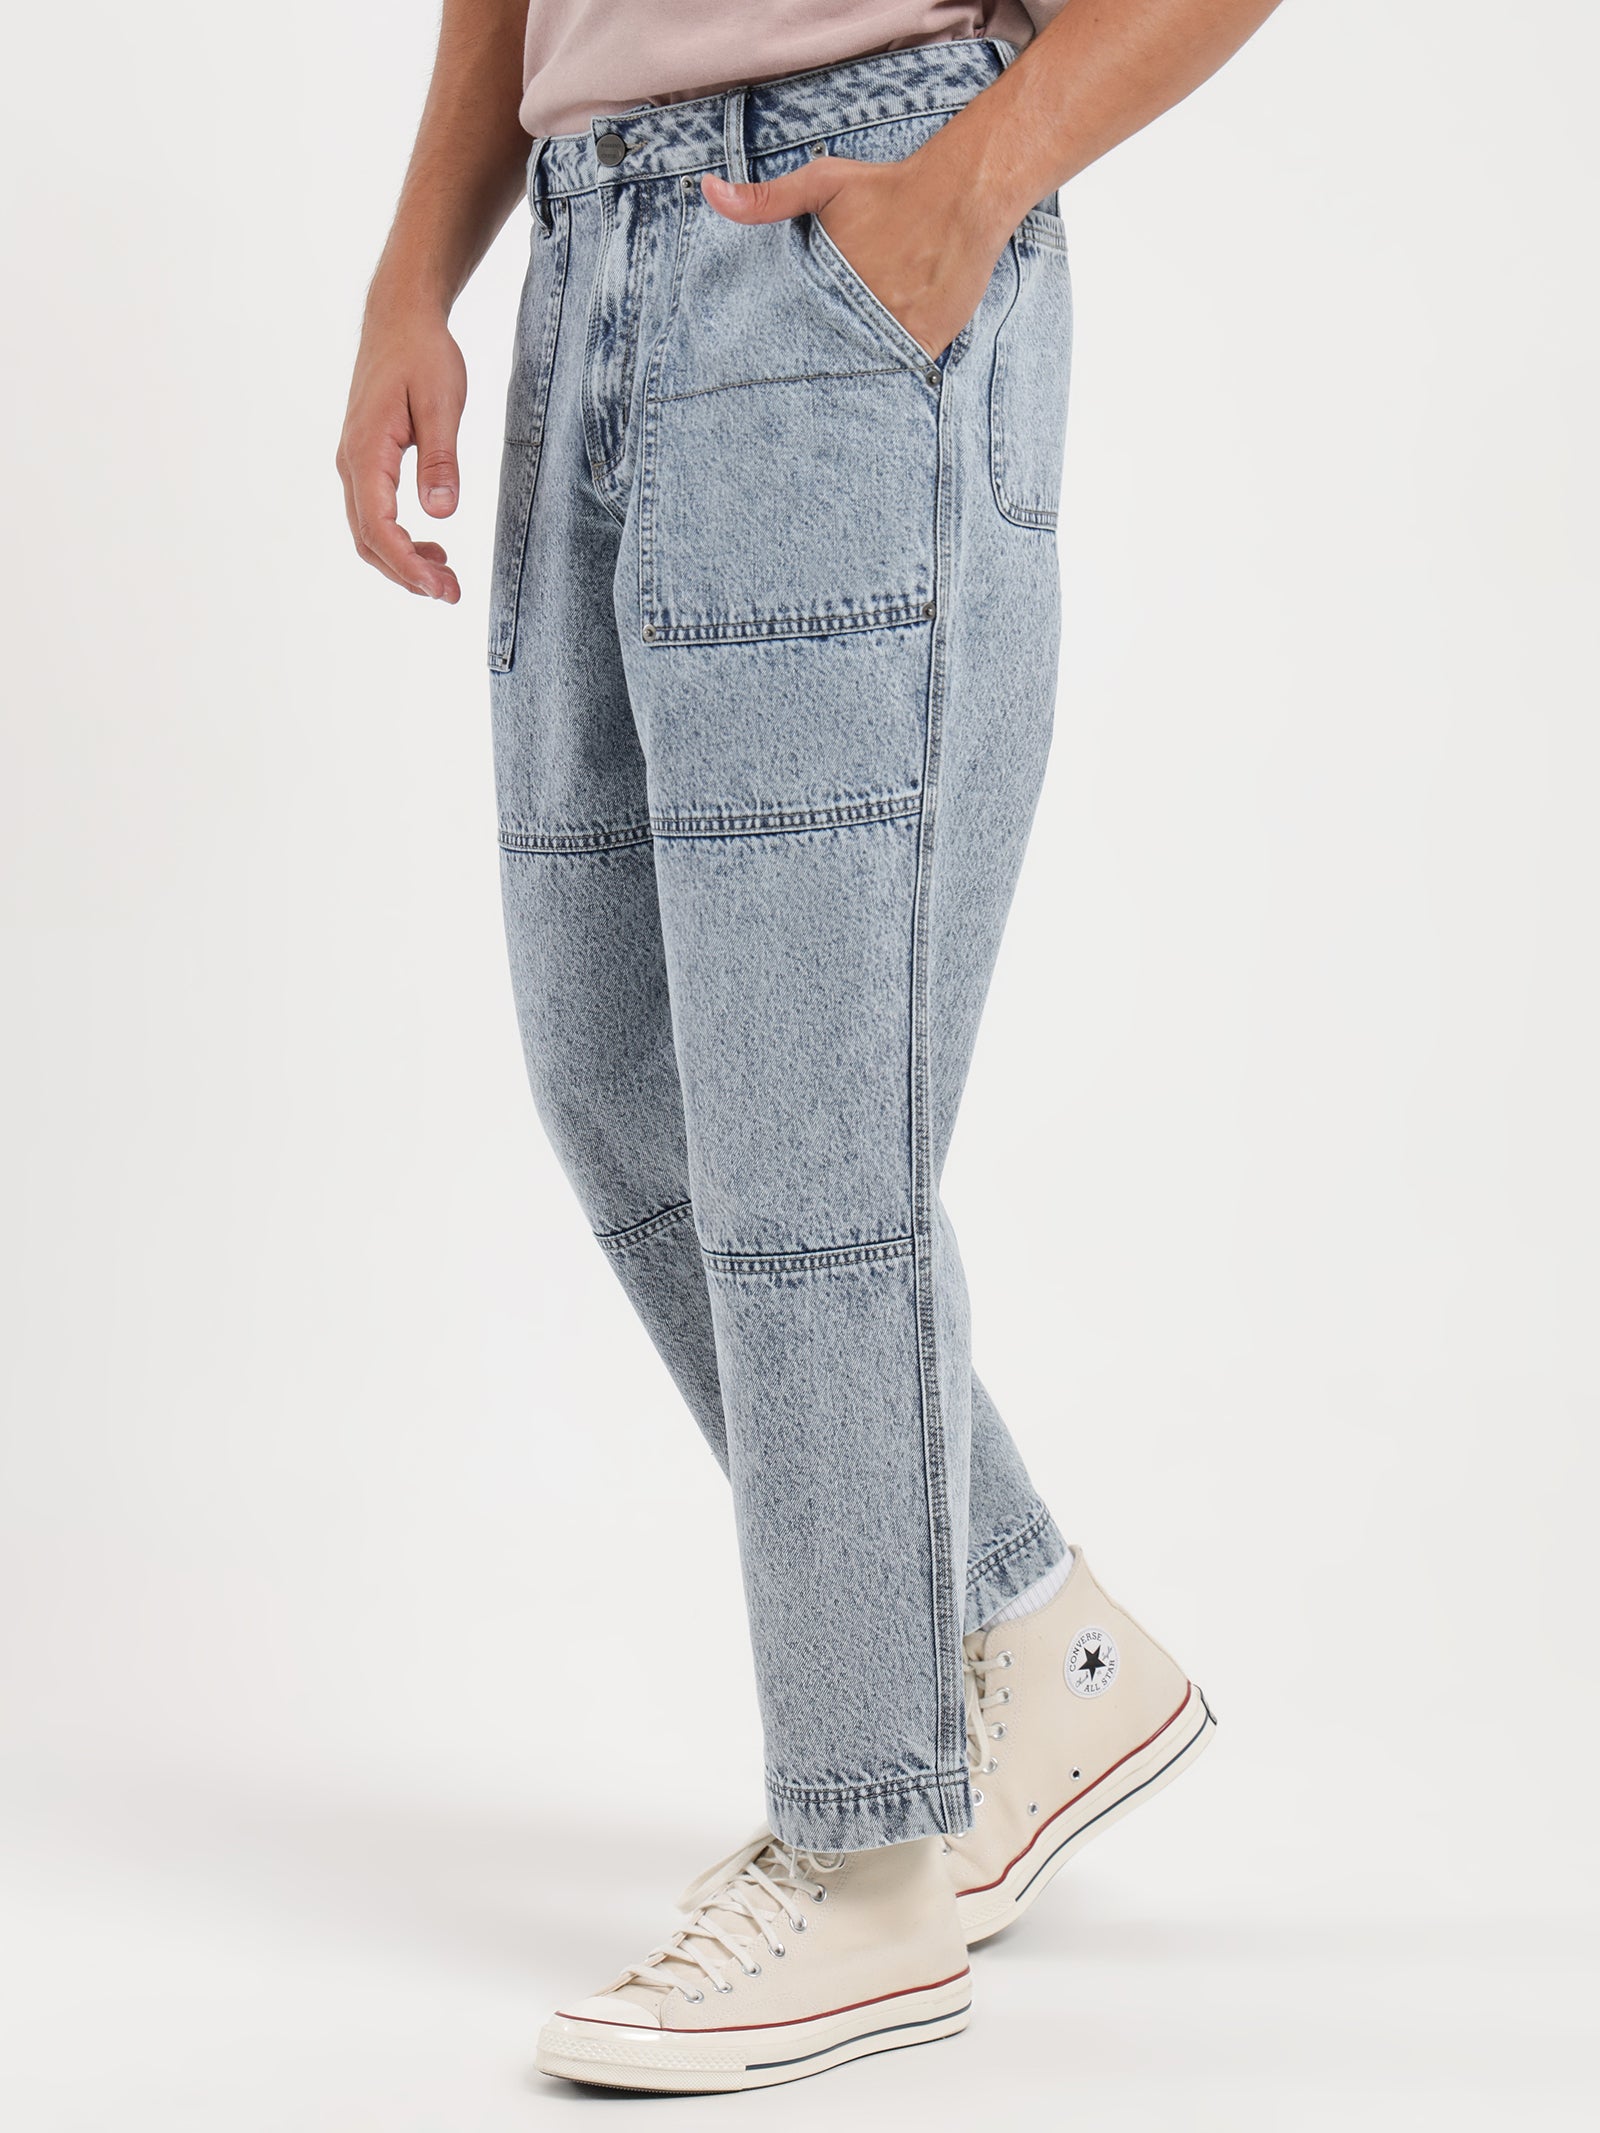 Anarchy Relaxed Jeans in Vintage Blue